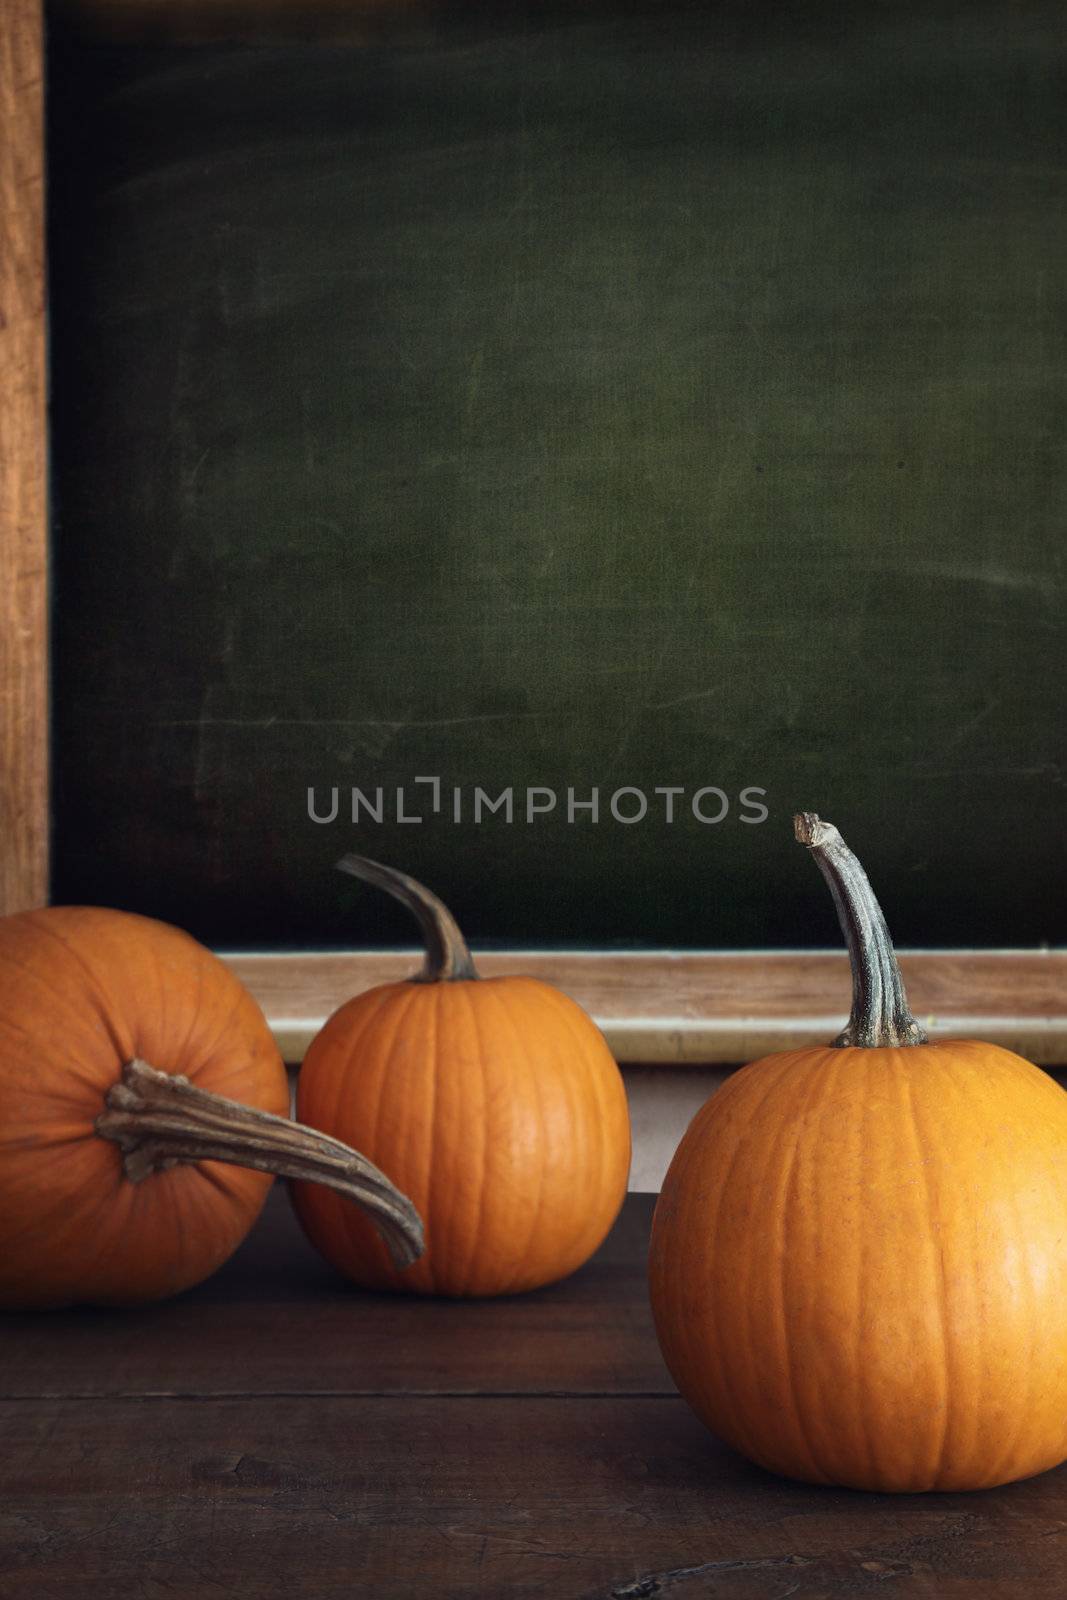 Pumpkins on table with menu board in background by Sandralise